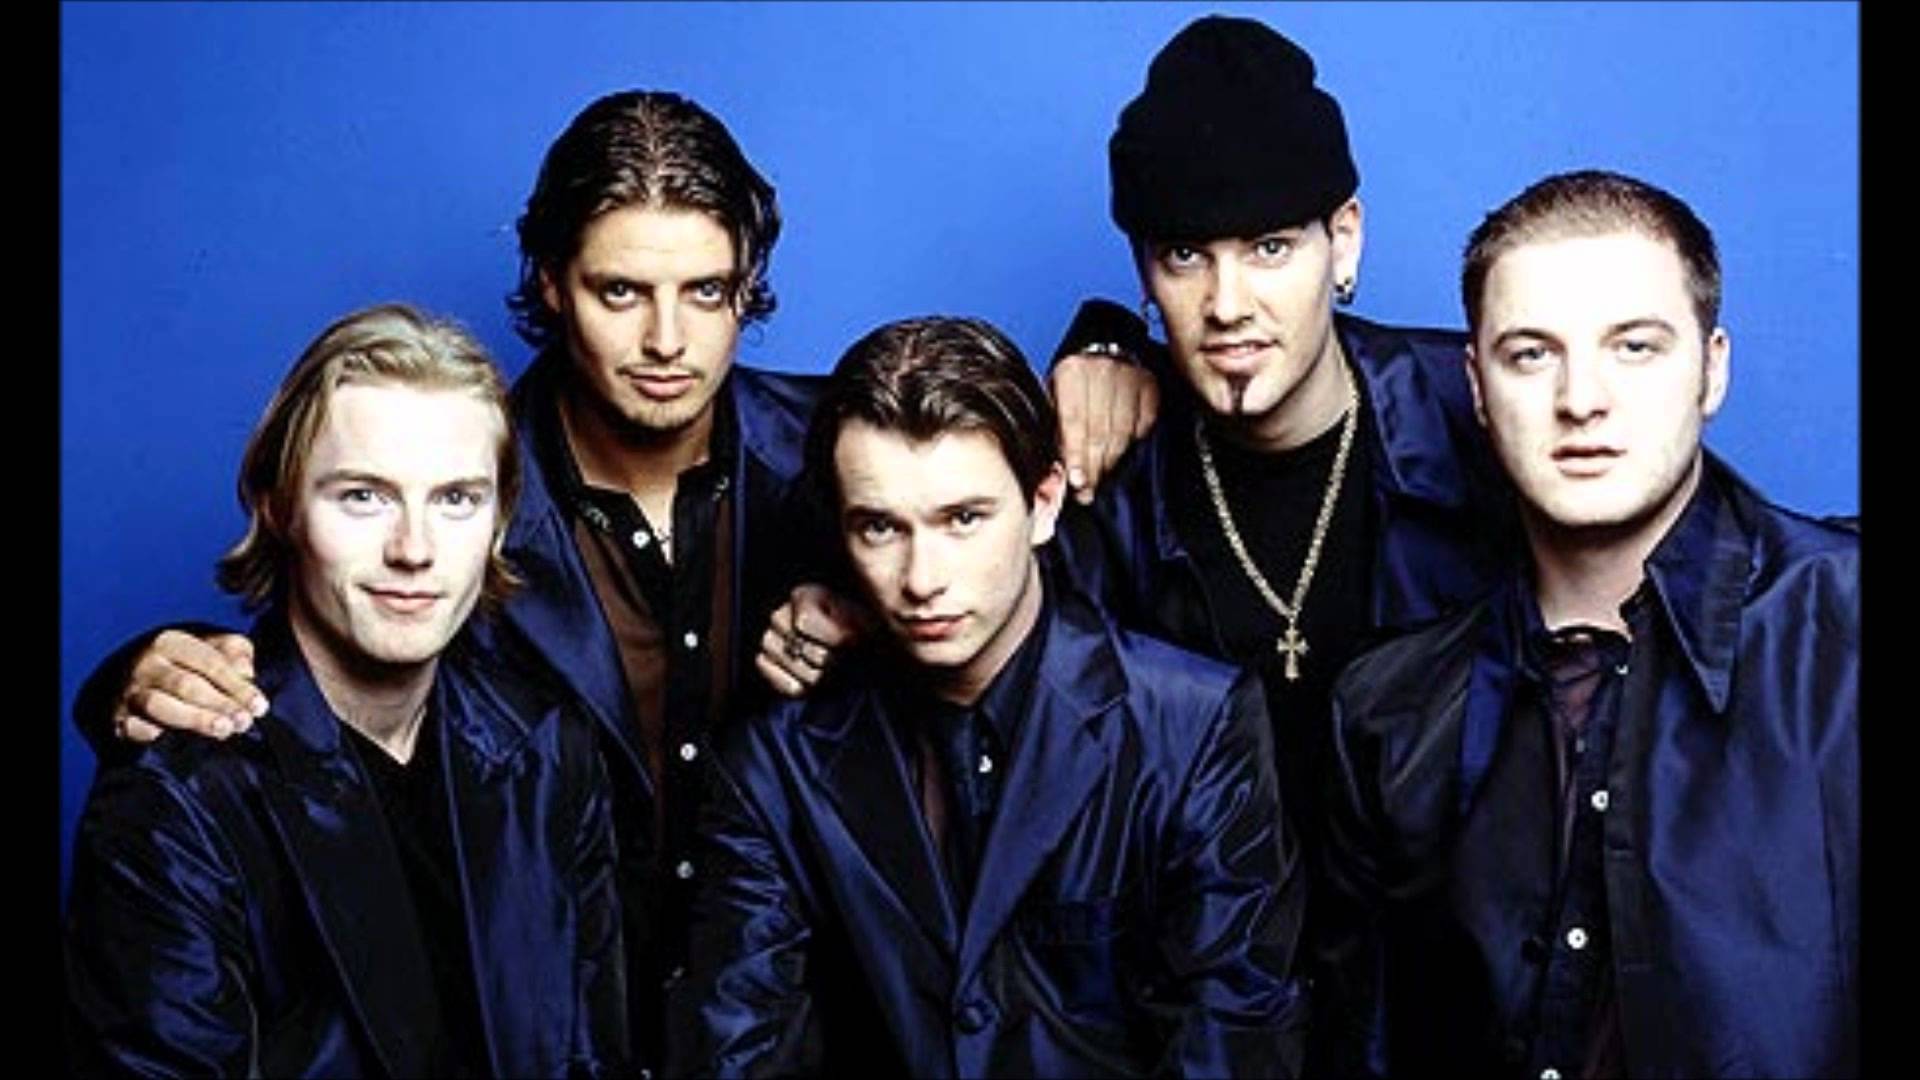 Boyzone - Mystical Experience Mix, Shooting Star and Mystical